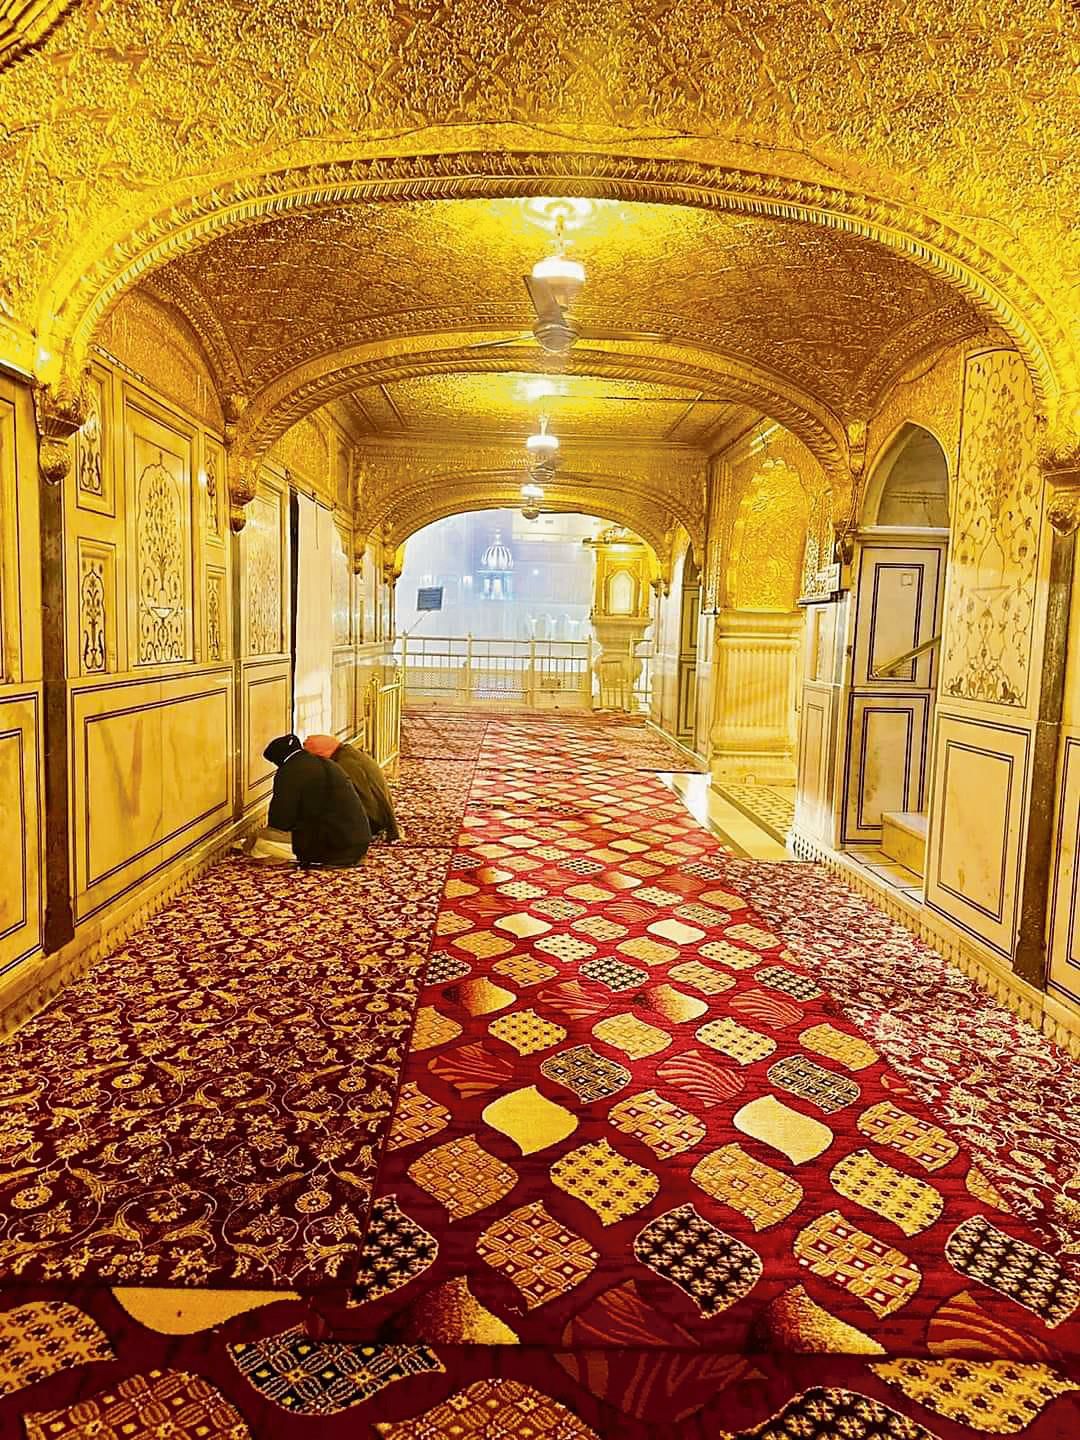 Extra layer of mats, carpets at Golden Temple this winter